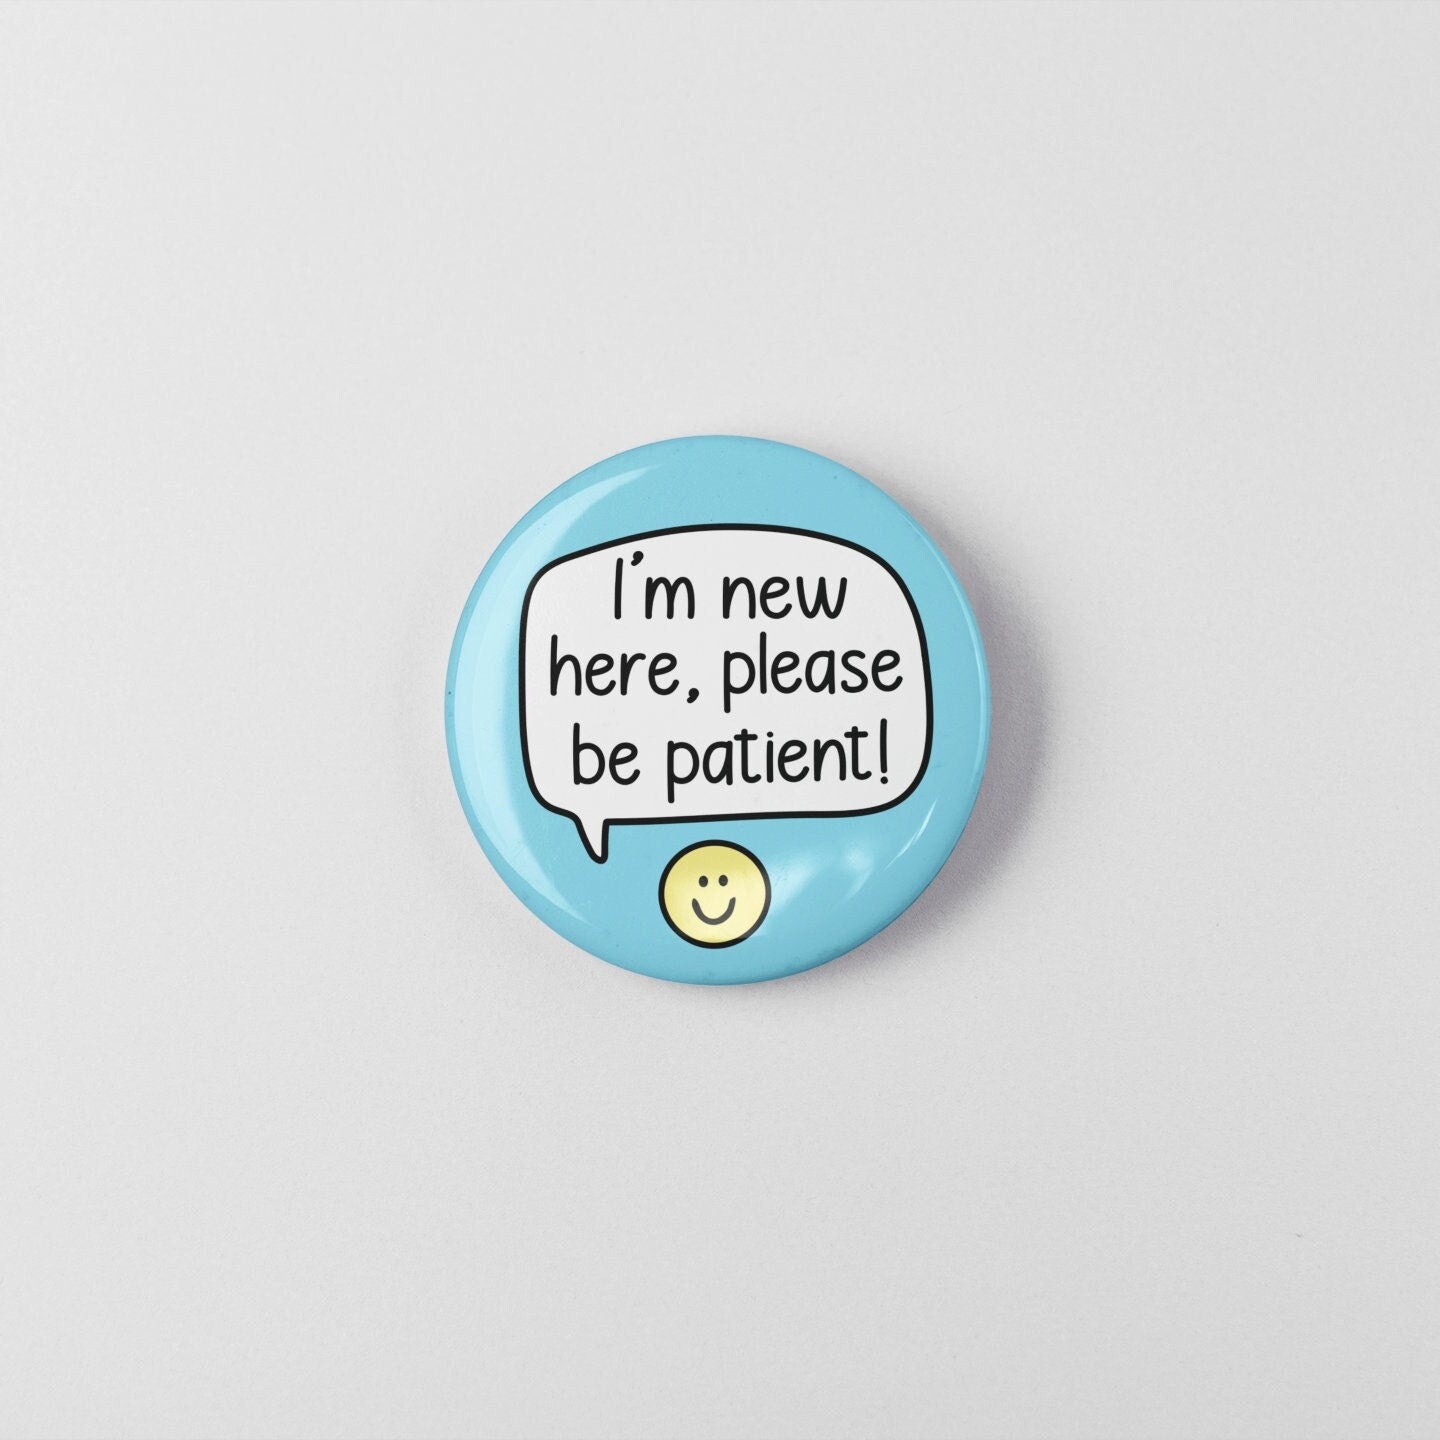 I'm New Here Please Be Patient - Pin Badge | Work Gift, Colleague Gifts